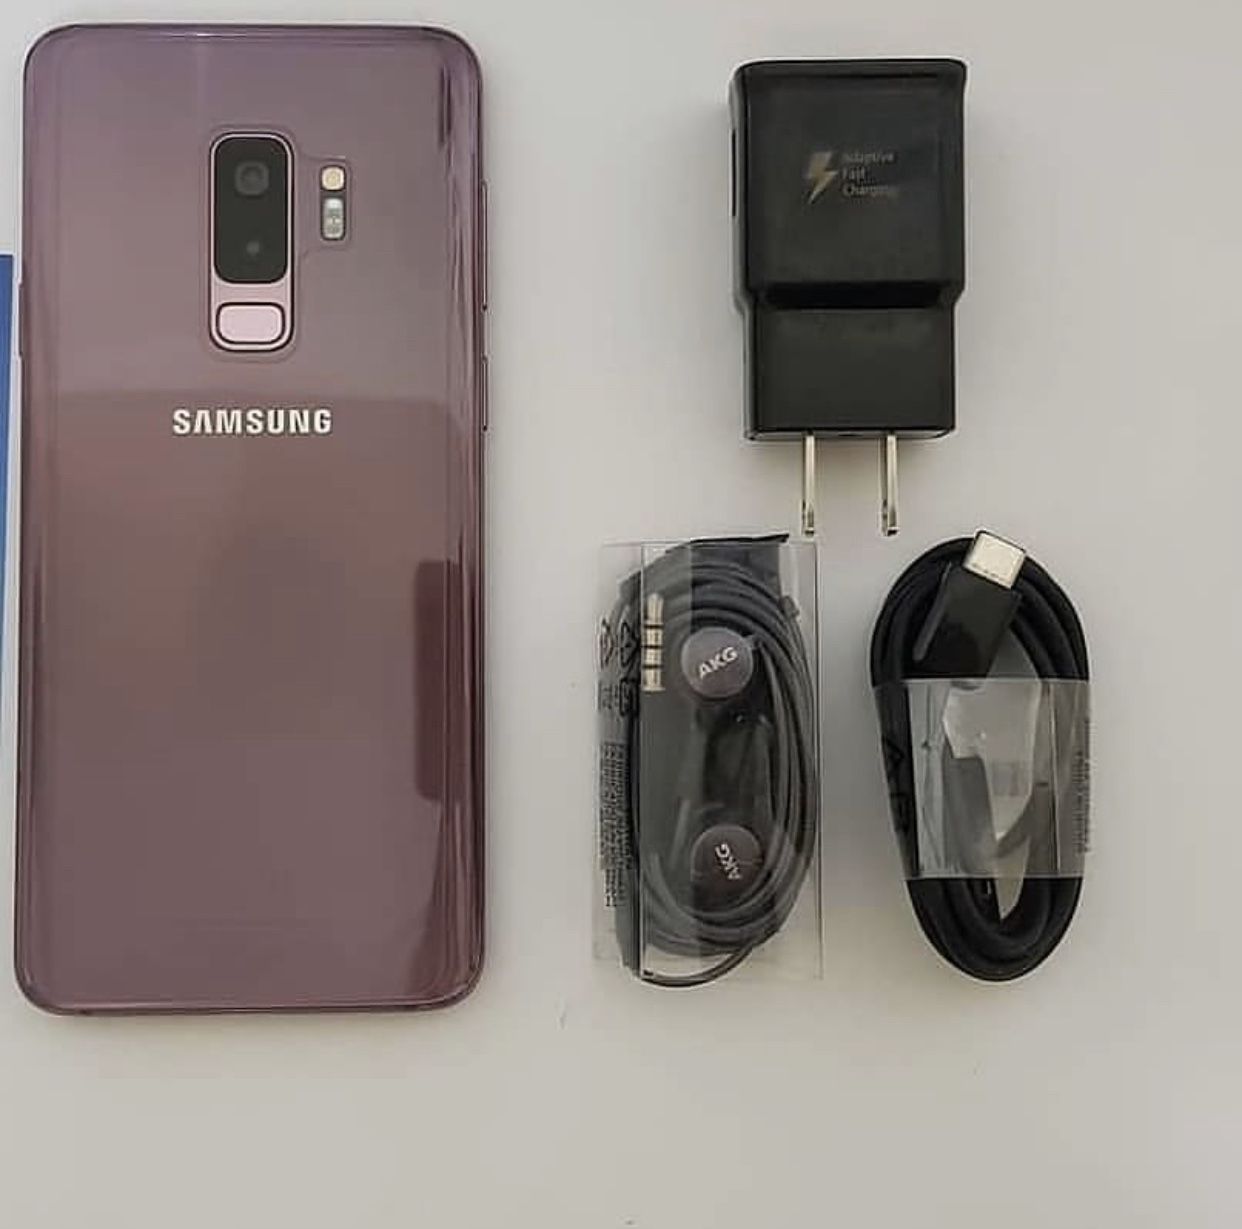 Samsung S9 plus unlocked any carrier excellent condition 30 days WARRANTY price $345